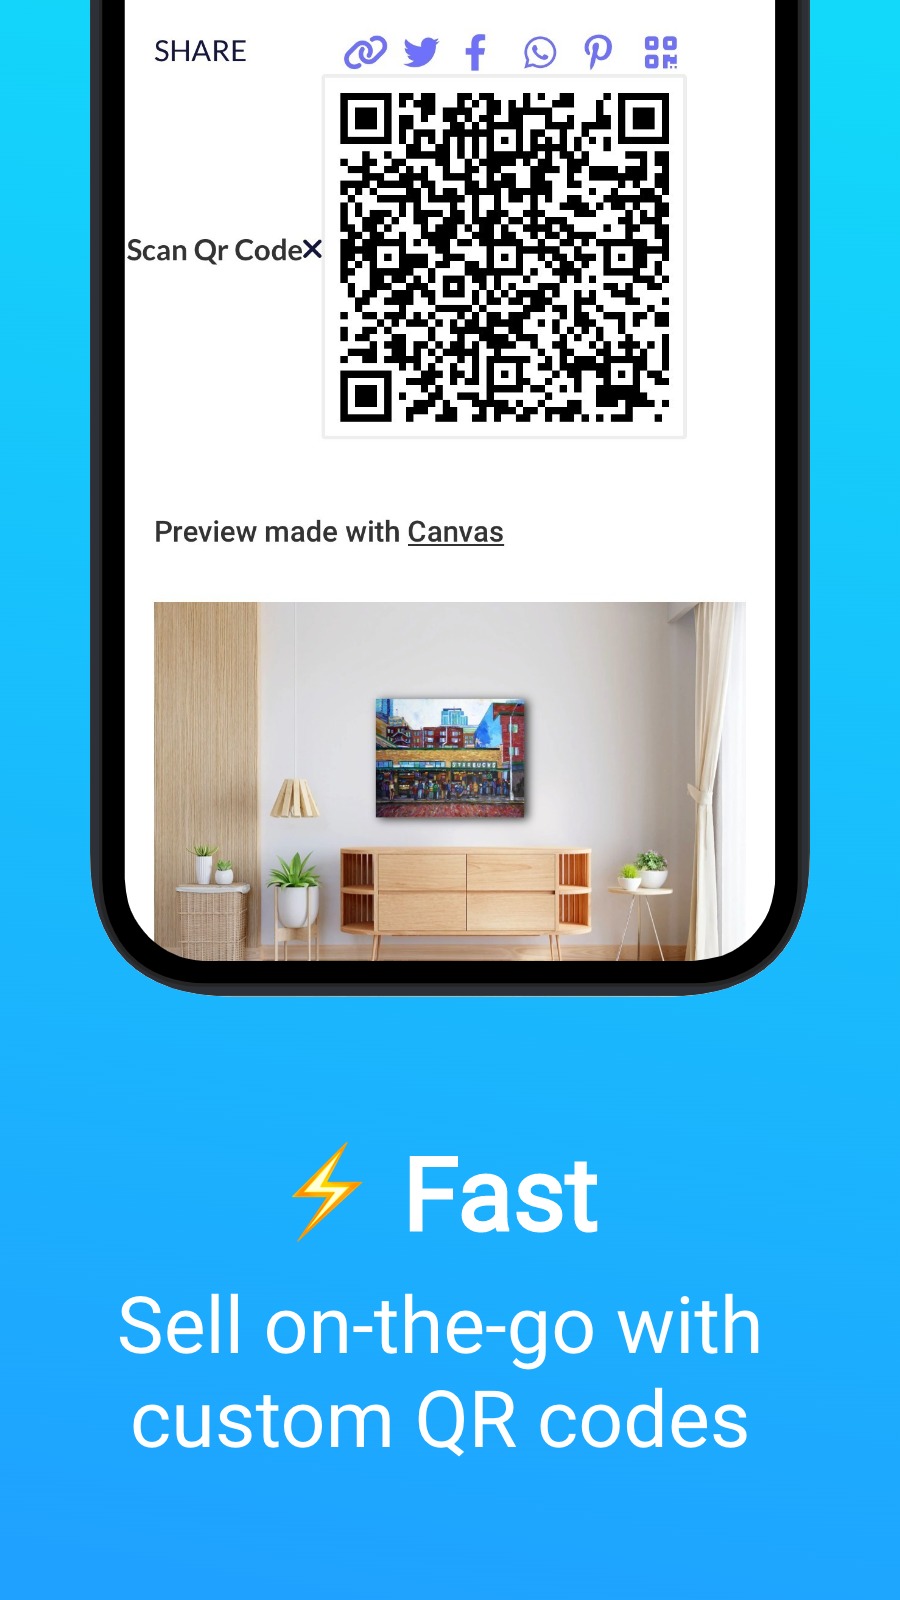 ⚡ Fast - Sell on-the-go with custom QR codes